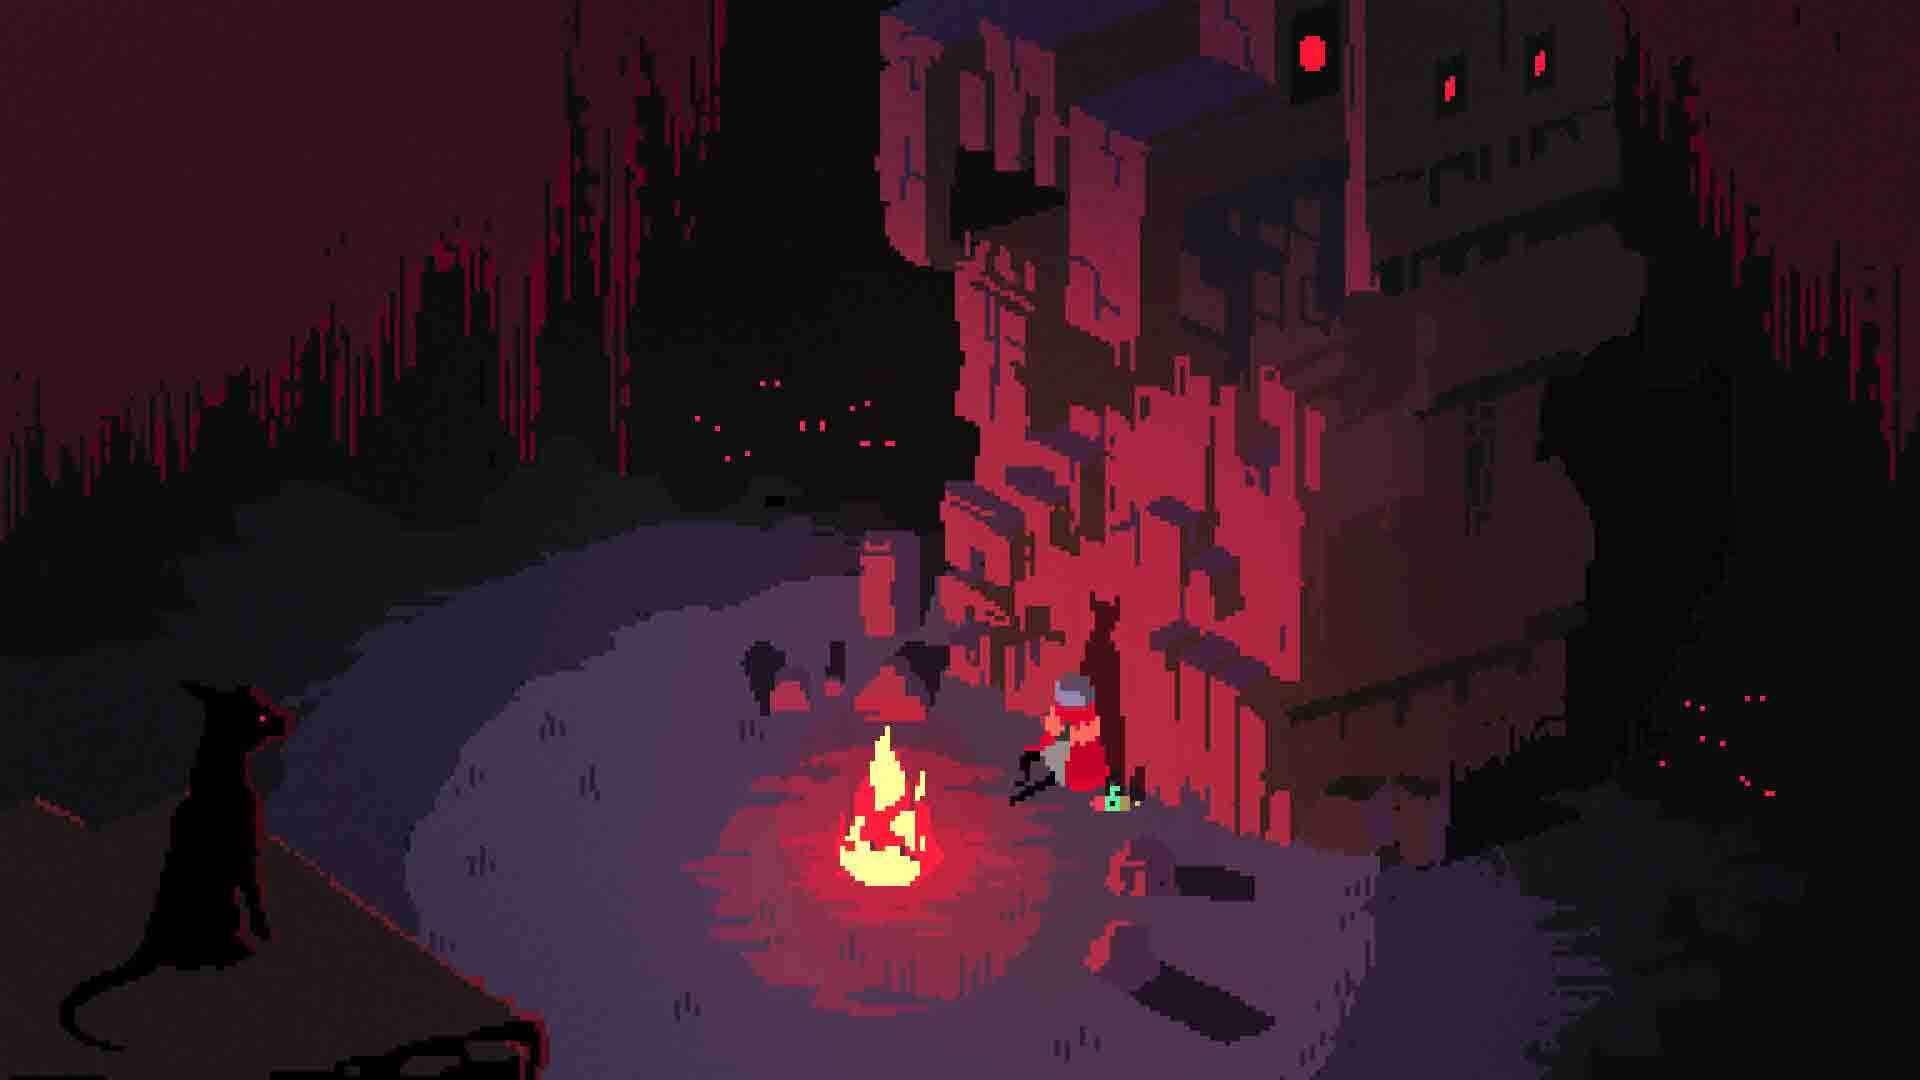 Hyper Light Drifter System Requirements for PC Games minimum, recommended specifications for Windows, CPU, OS, Processor, RAM Memory, Storage, and GPU.